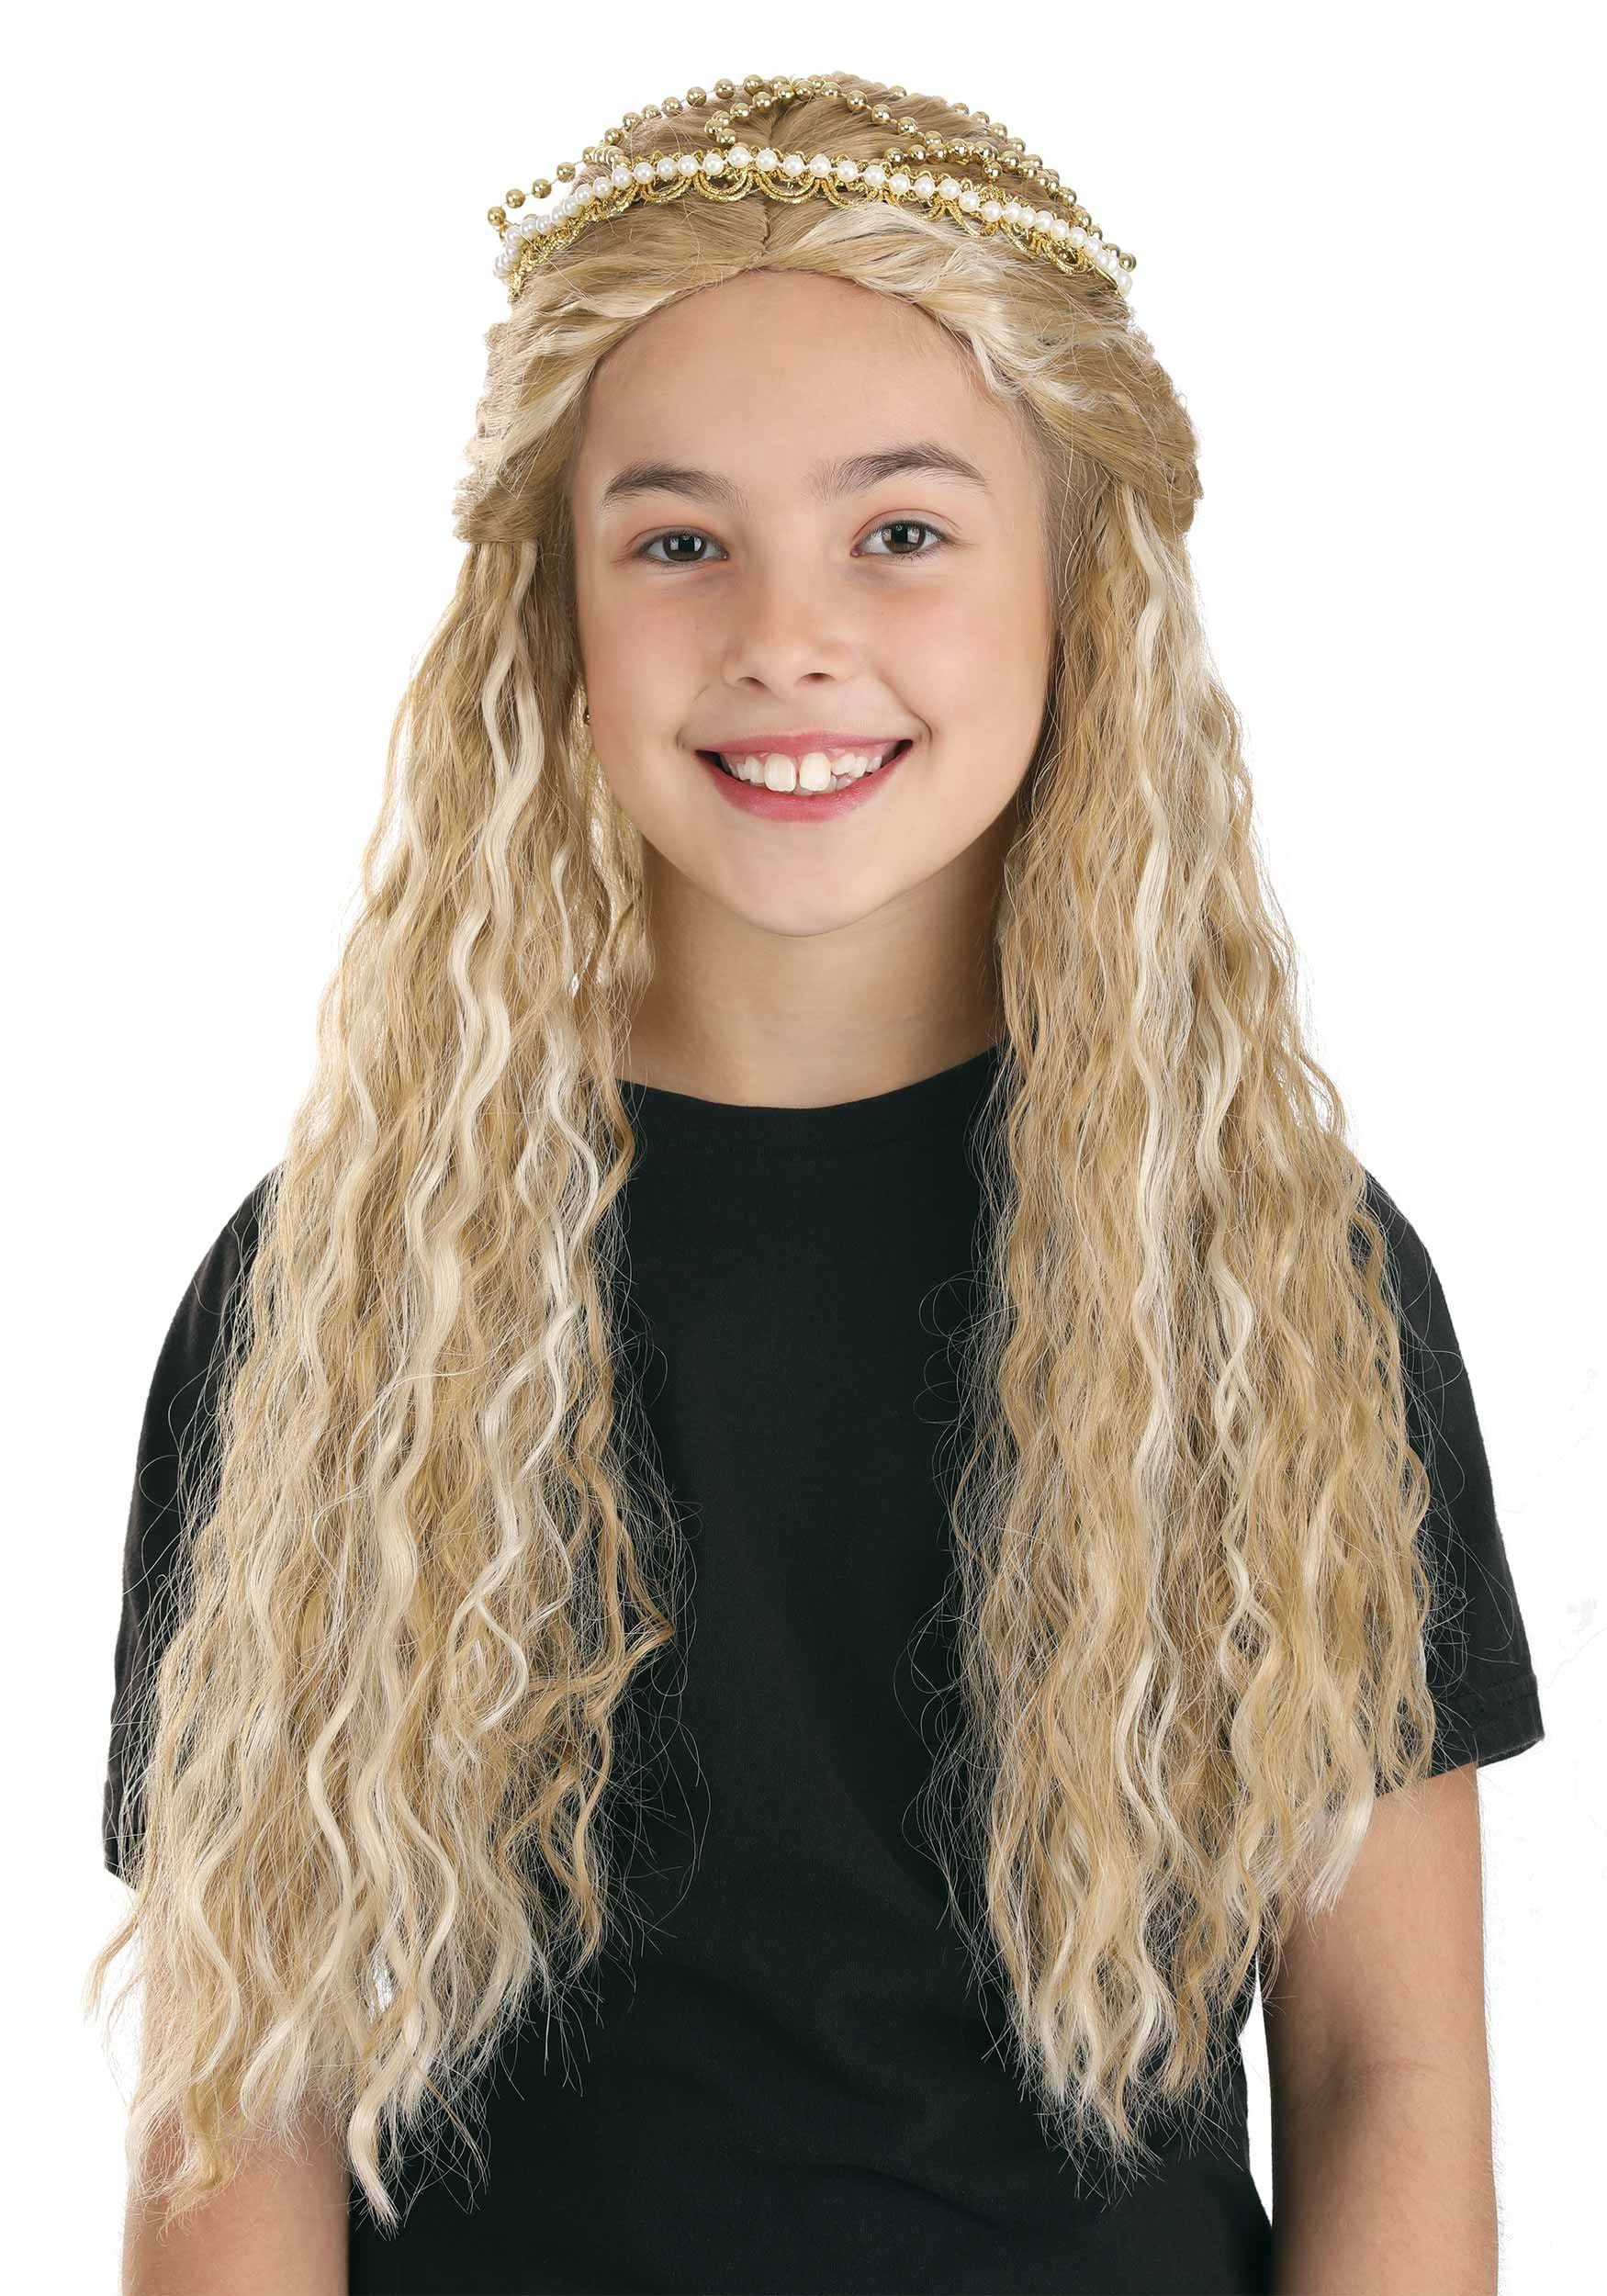 The Princess Bride Buttercup Wig for Kids